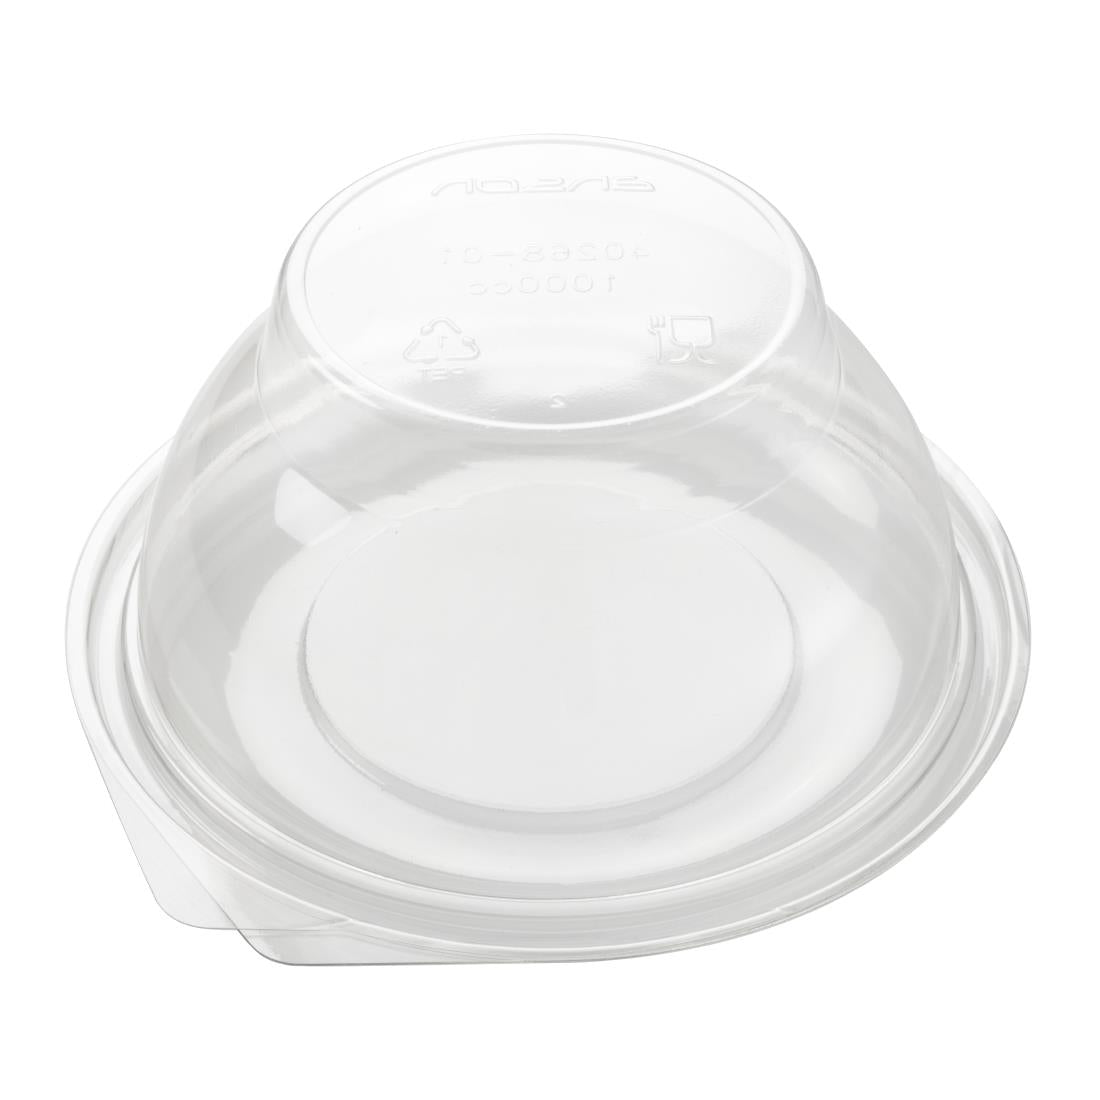 FB370 Faerch Contour Recyclable Deli Bowls With Lid 1000ml / 35oz (Pack of 200) JD Catering Equipment Solutions Ltd